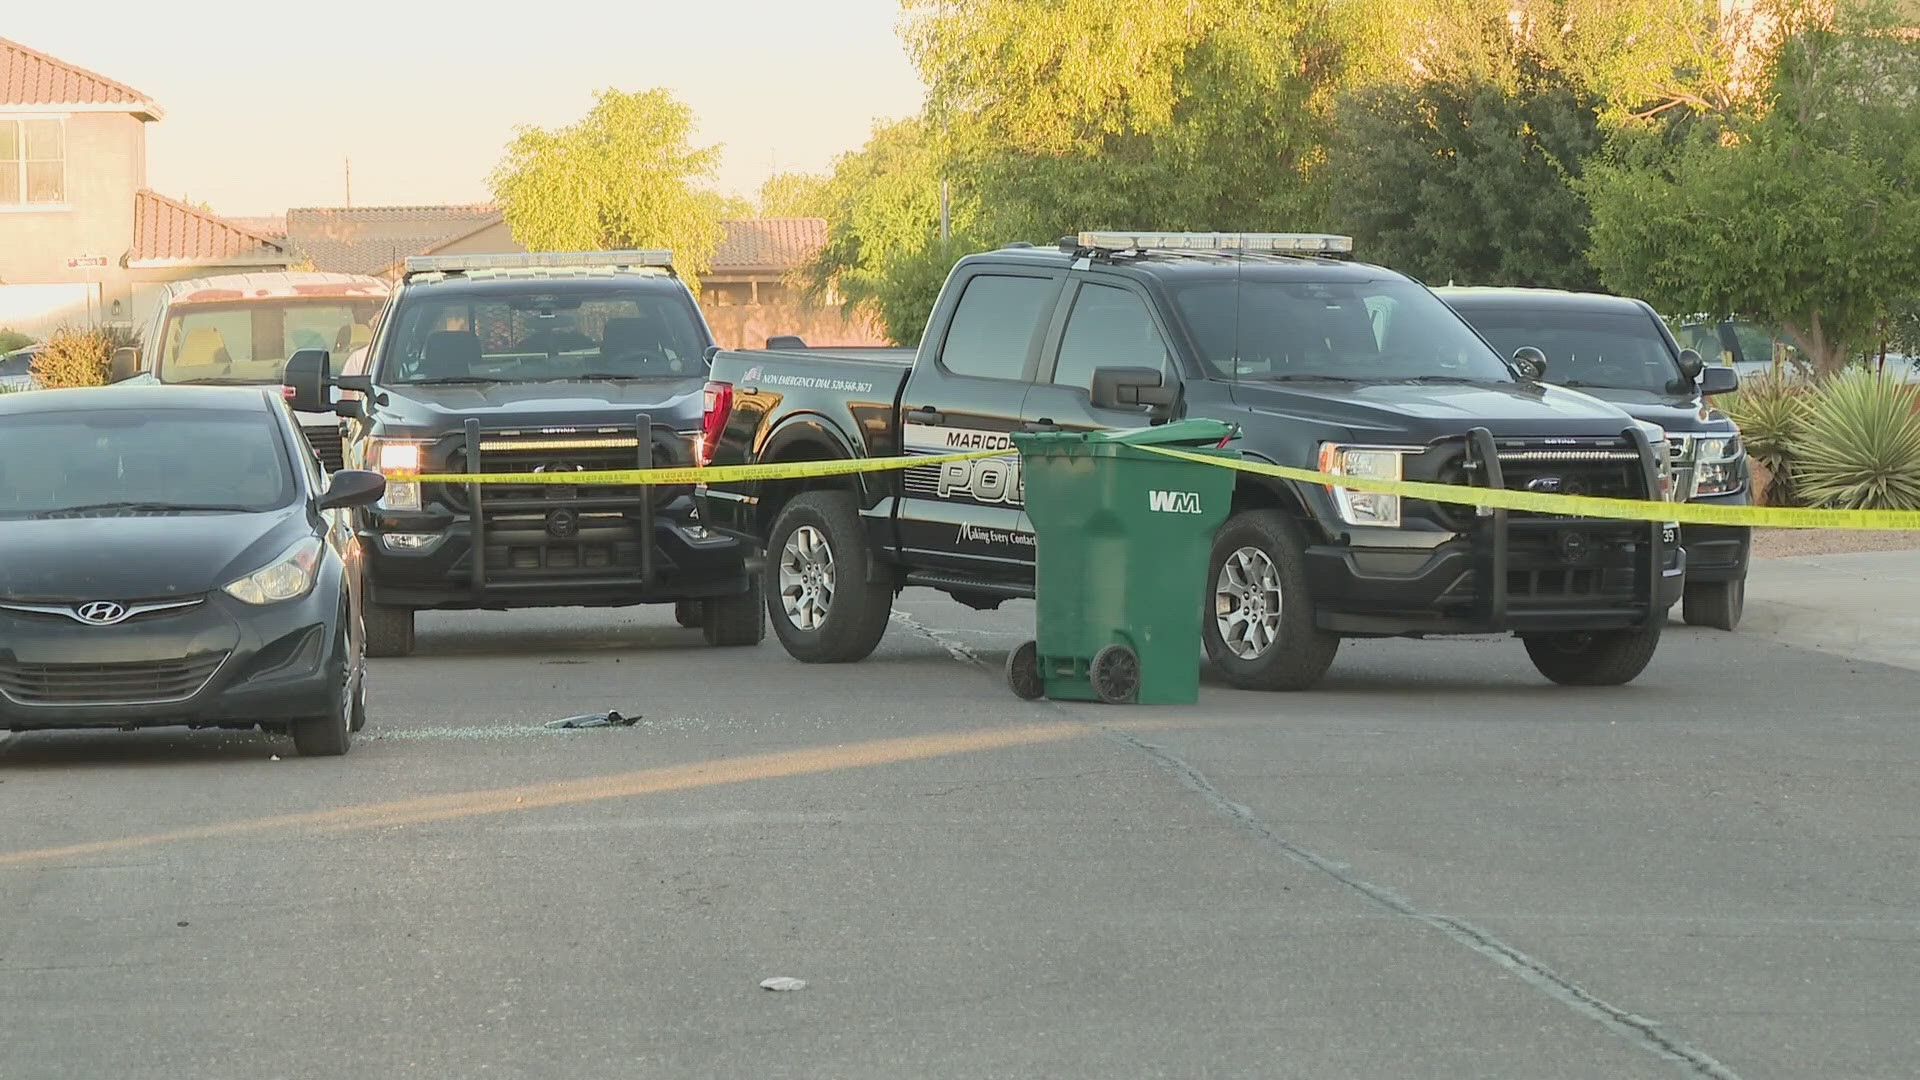 The officer who was shot is expected to survive, the City of Maricopa said.